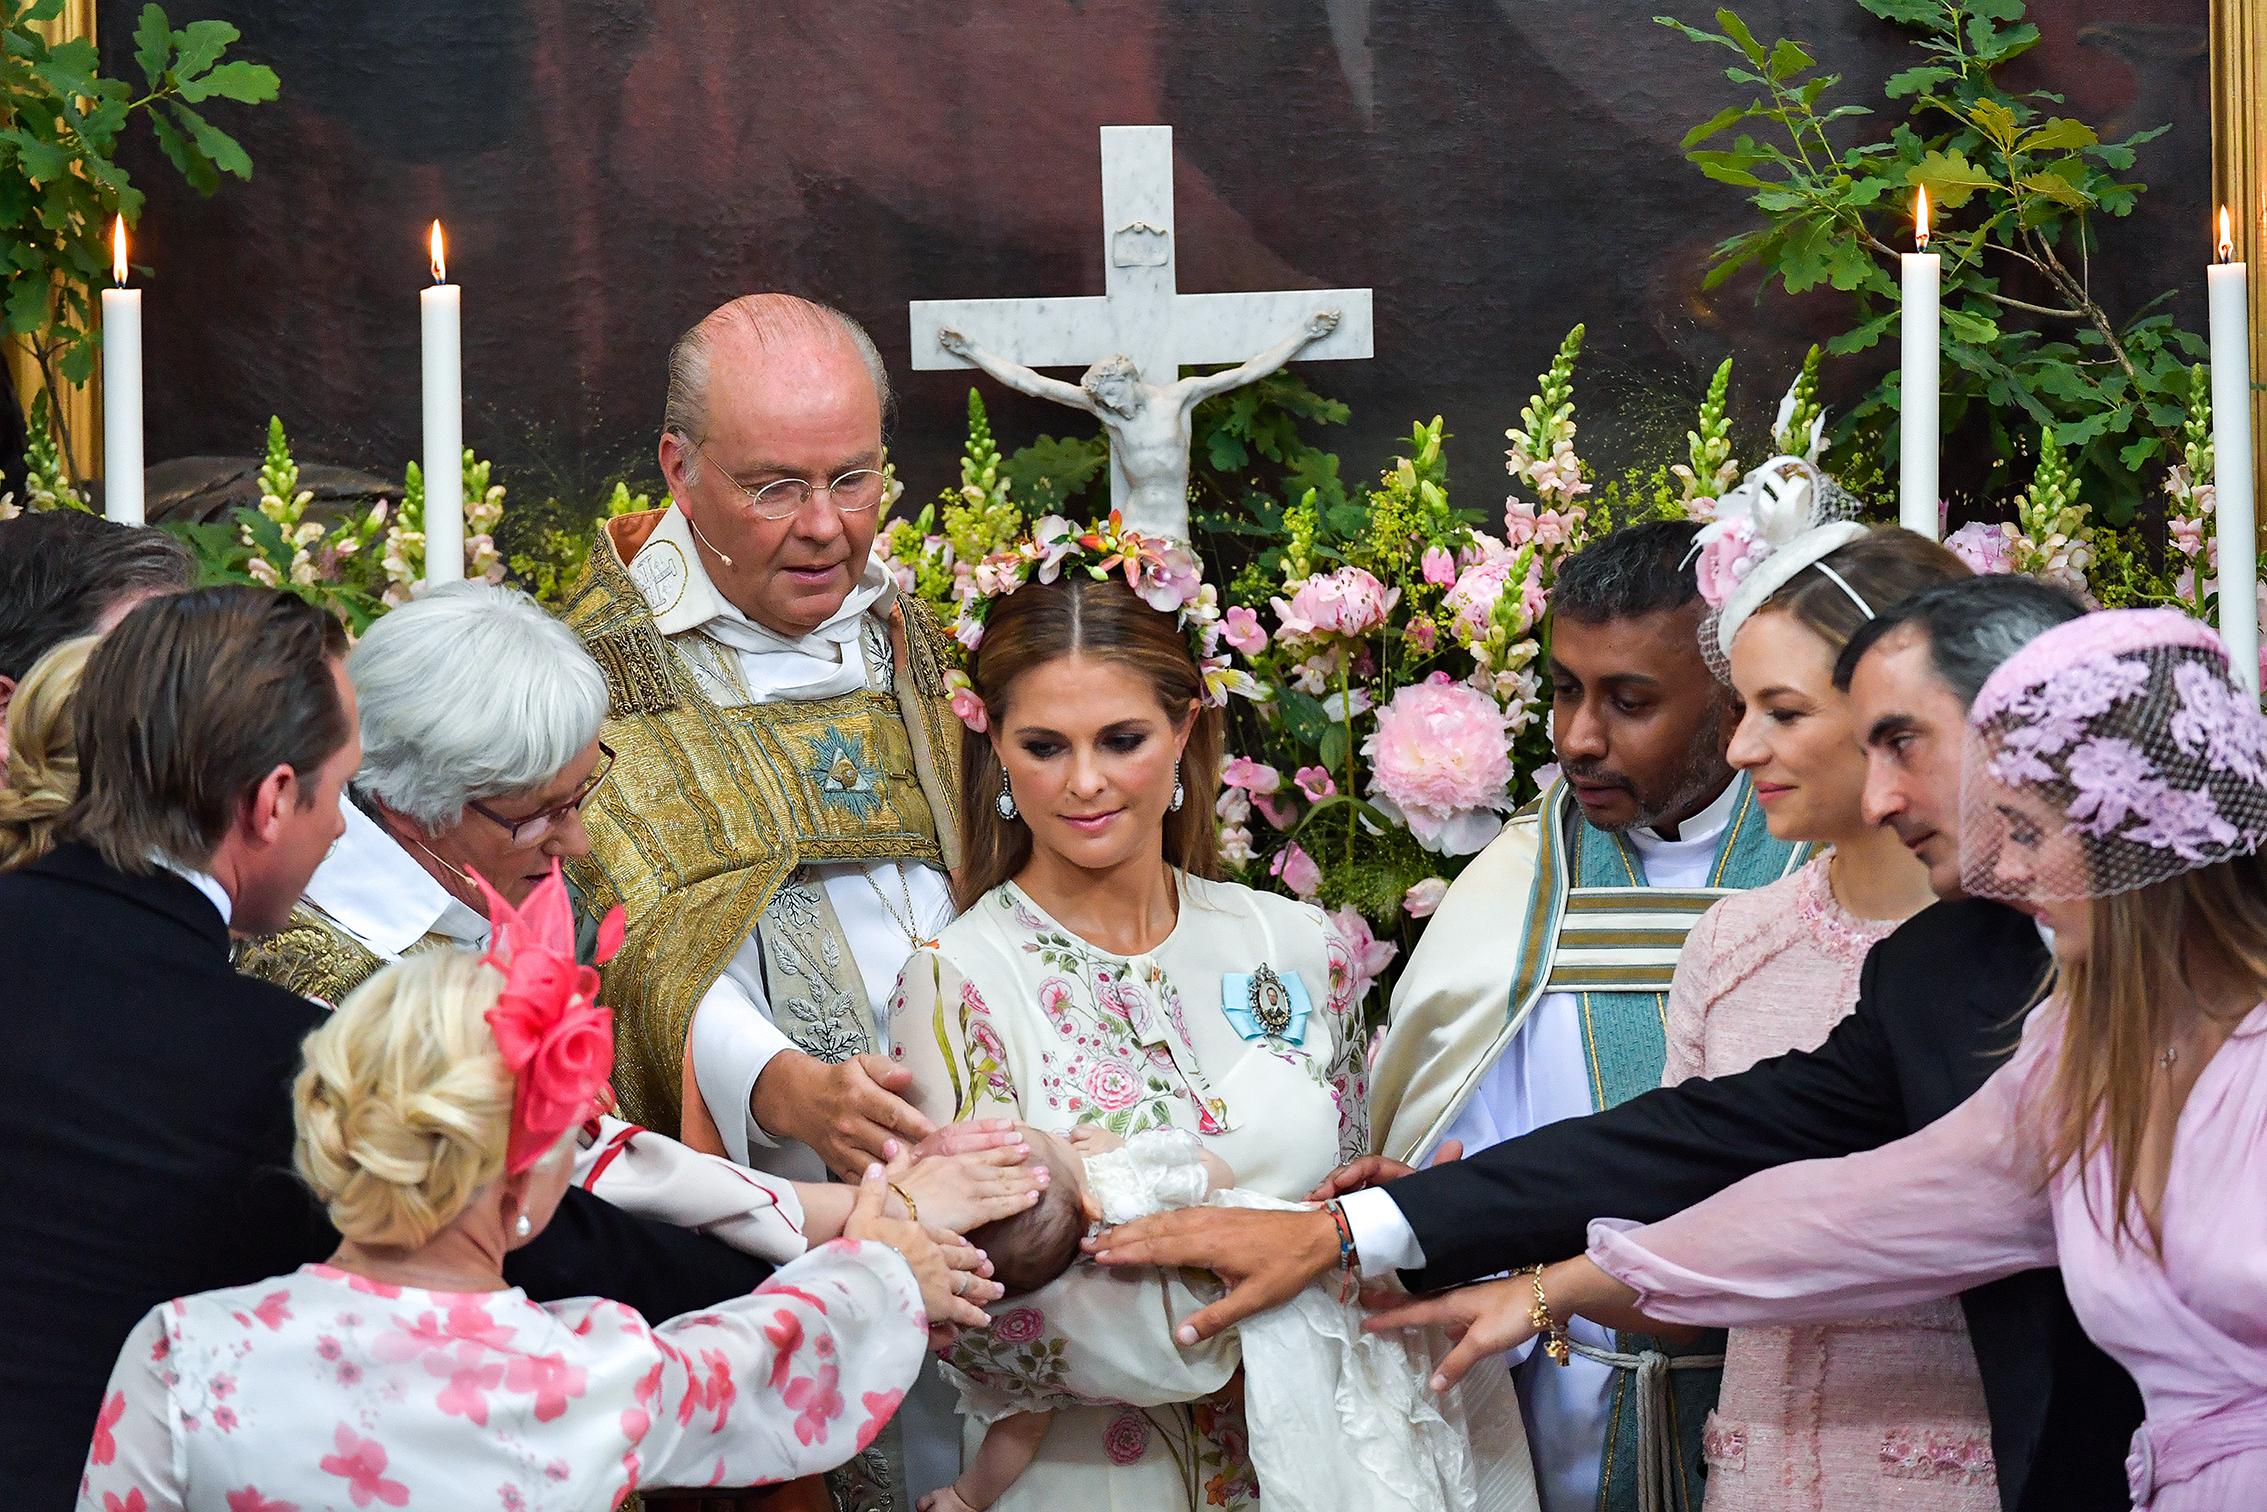 Princess Madeleine holding a baby in a church, surrounded by priests and other people.